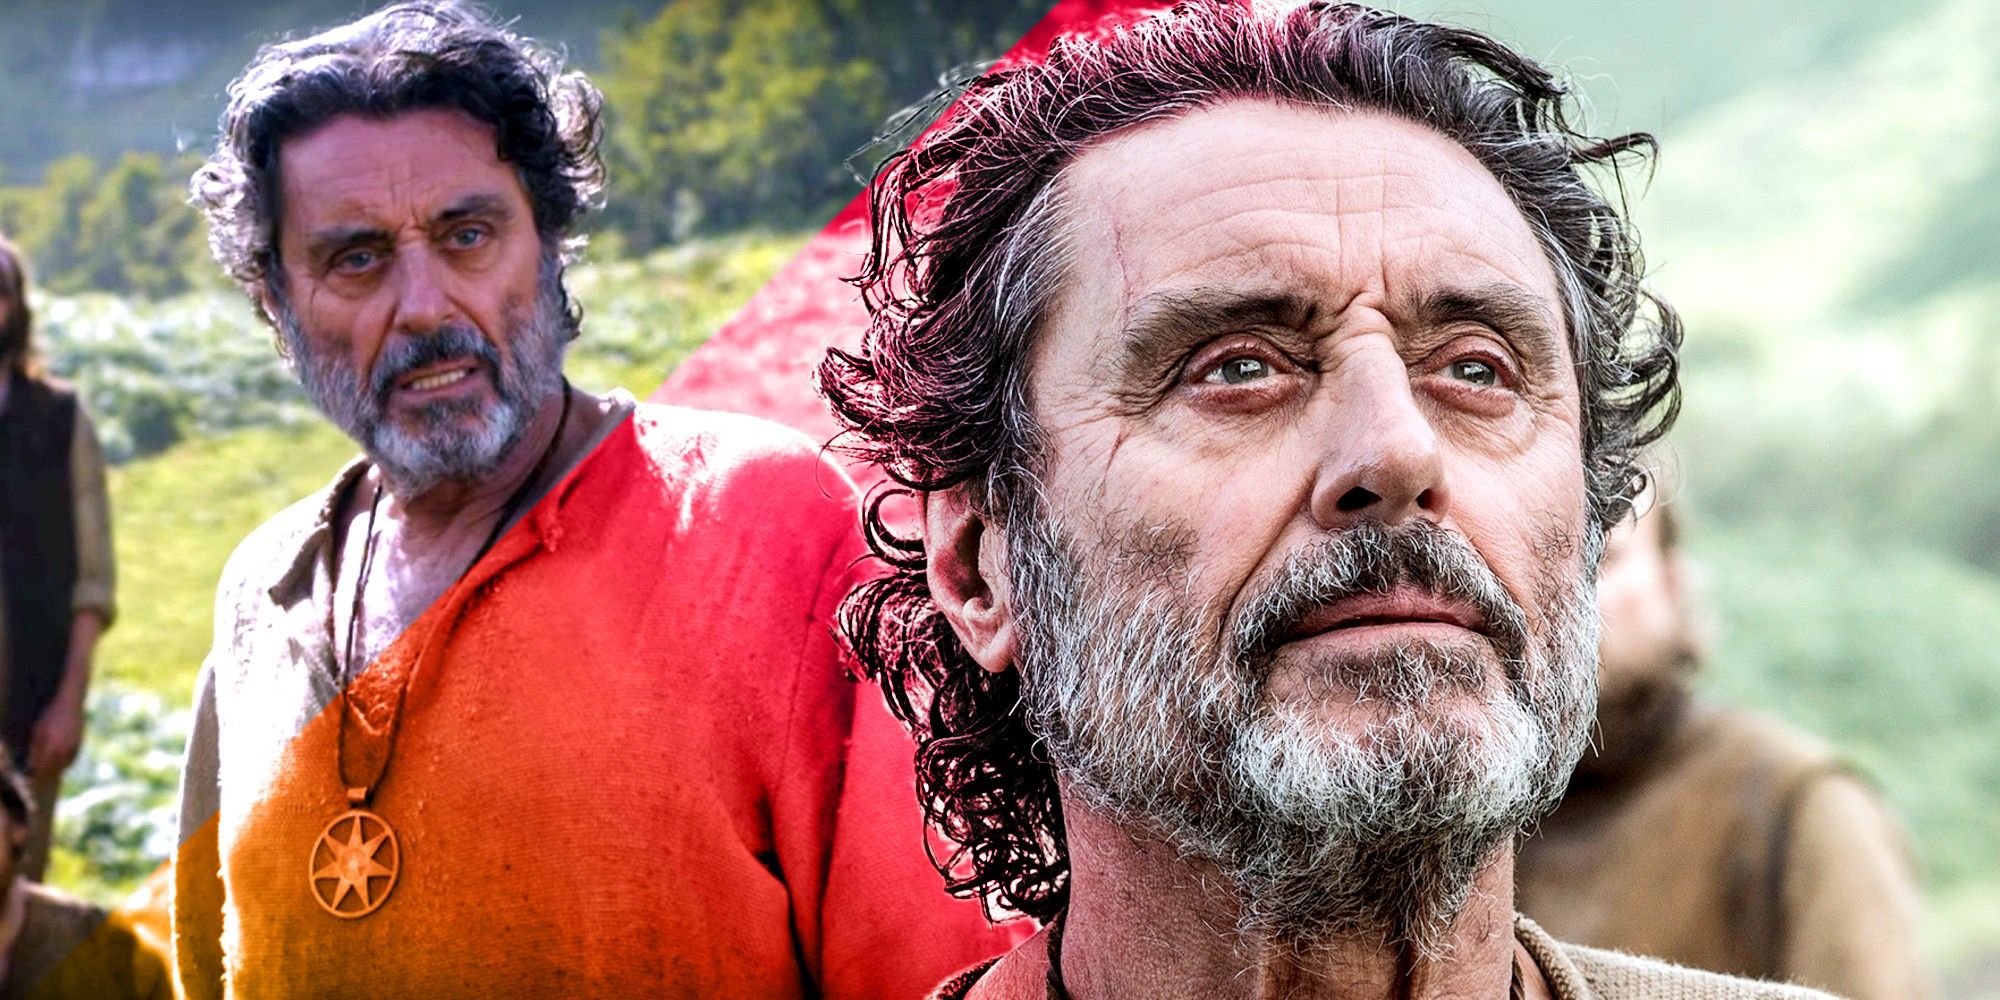 game of thrones ian mcshane cameo brother ray